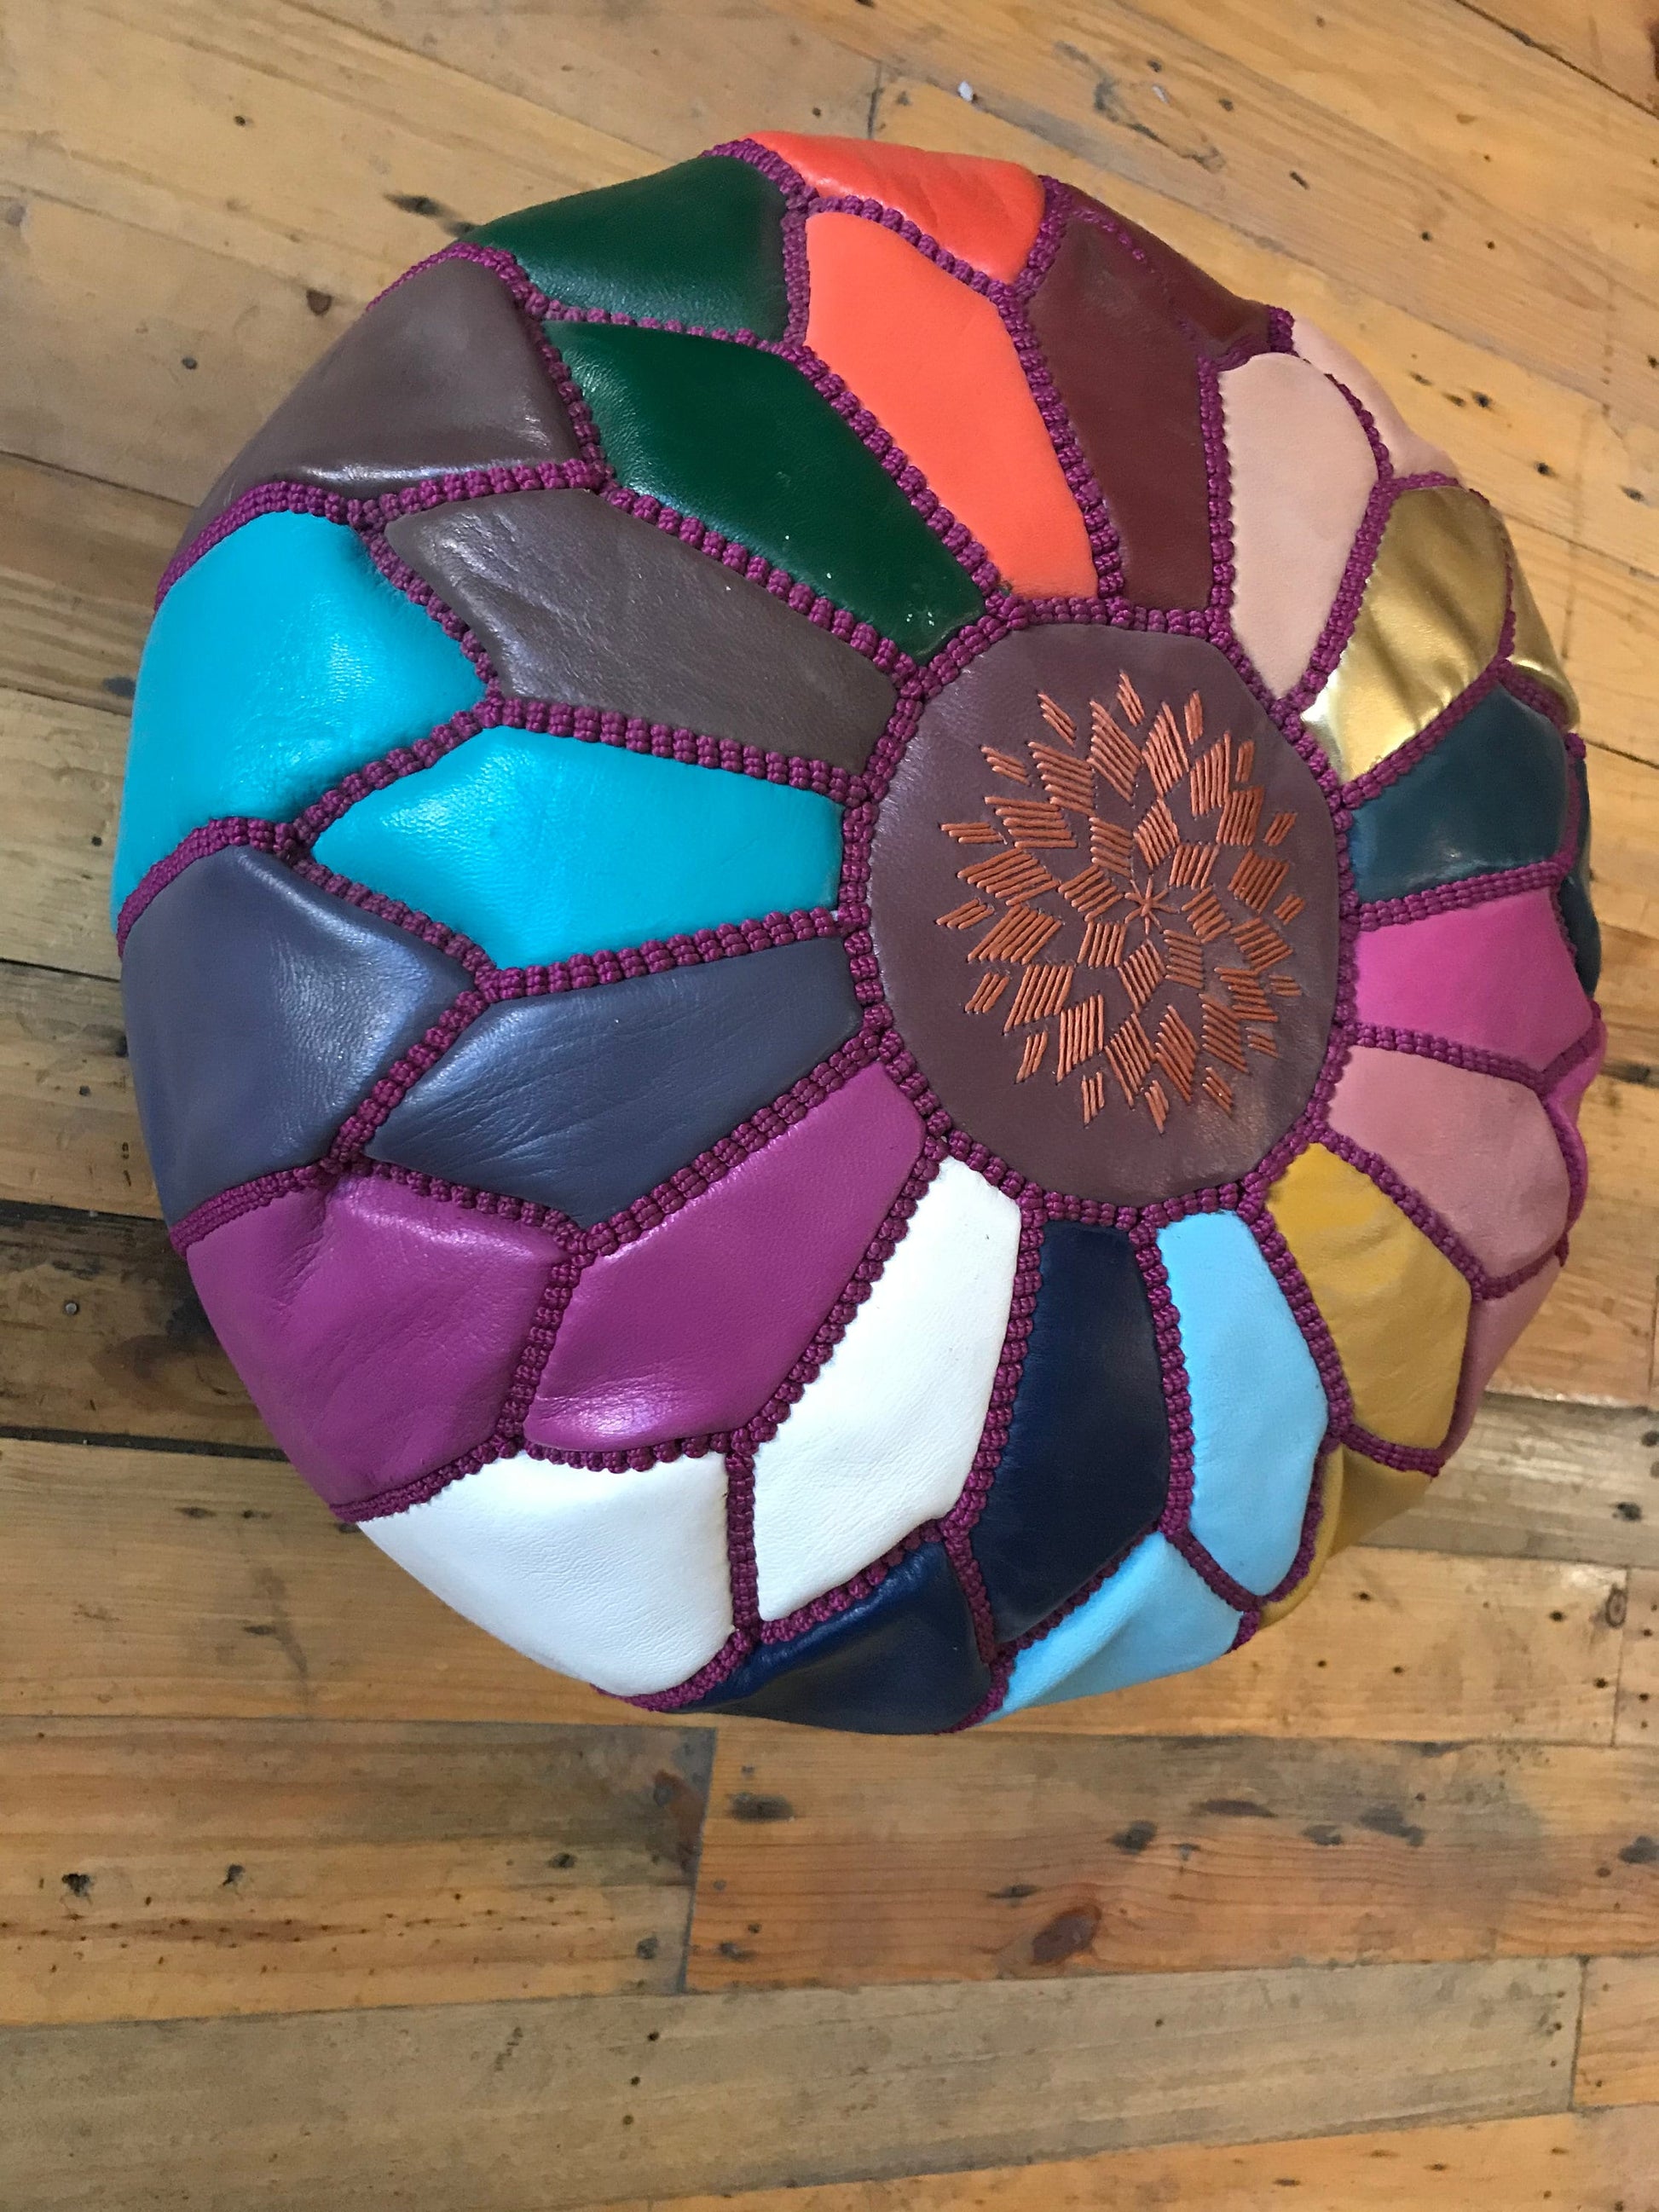 Mini MultiColor Moroccan handcrafted leather Pouf with brown stitching, Berber Pouf, Ottoman Leather Pouf, Ottoman footstool Pouf Home Decor